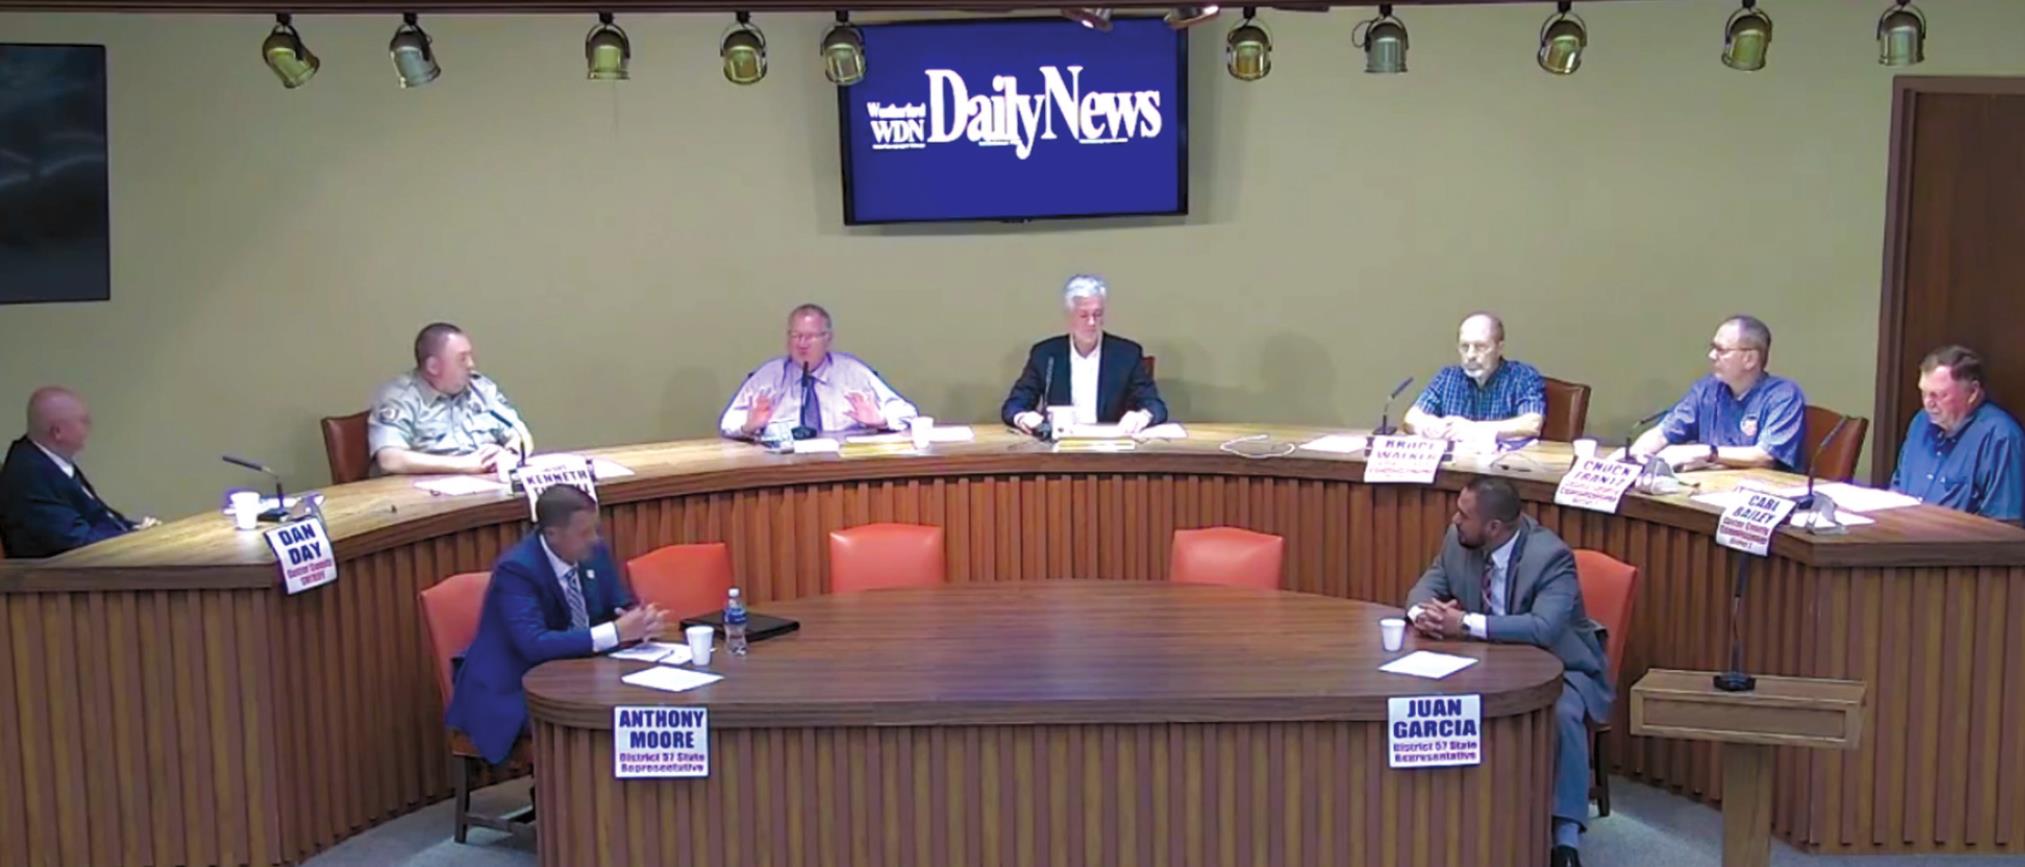 Candidates for county commission, sheriff and House District 57 participate in a candidate forum sponsored by the Weatherford Daily News.